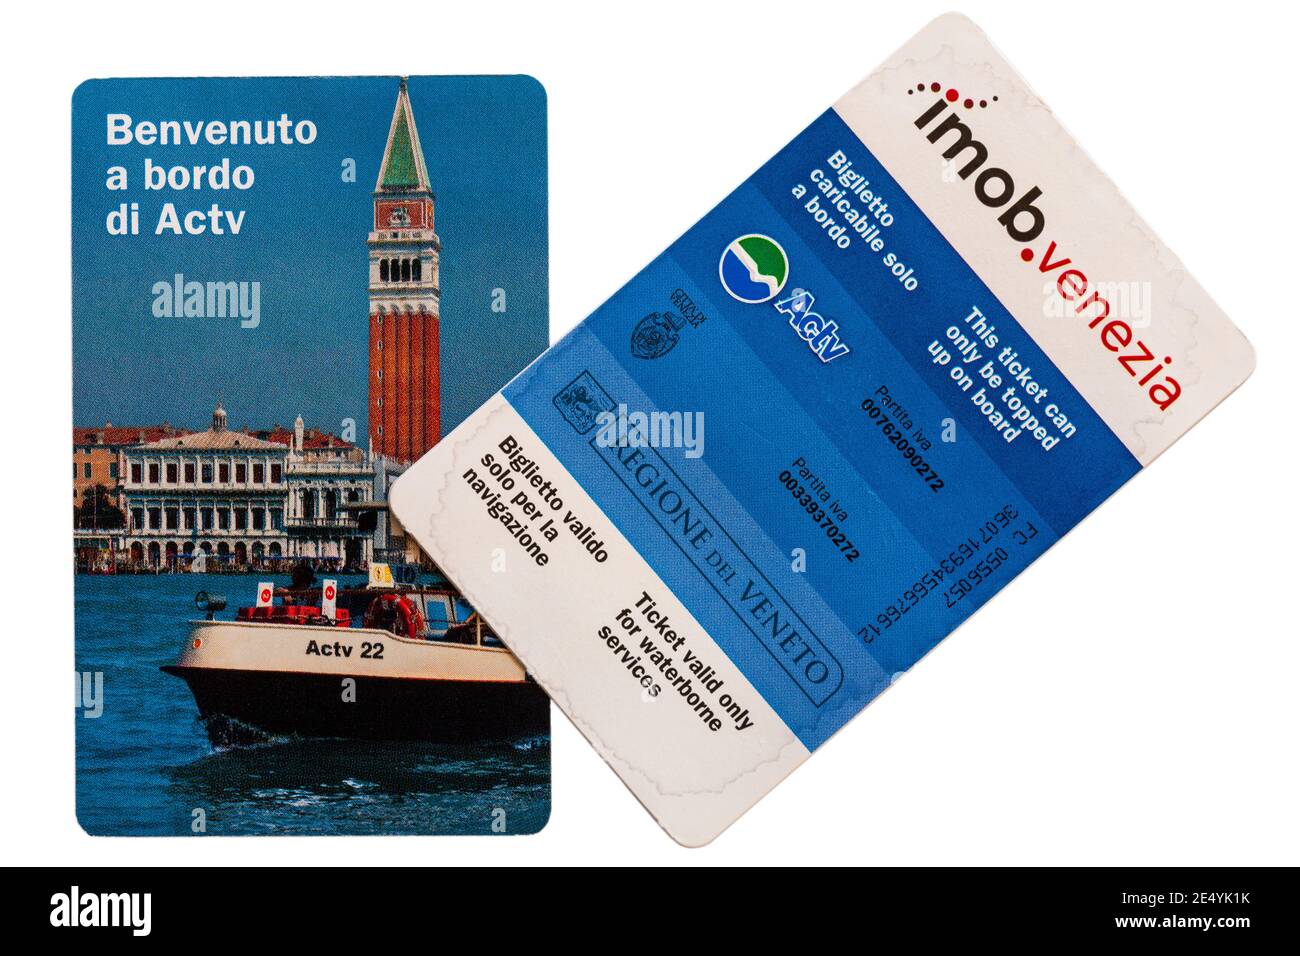 Actv tickets for waterborne services in Venice Stock Photo - Alamy